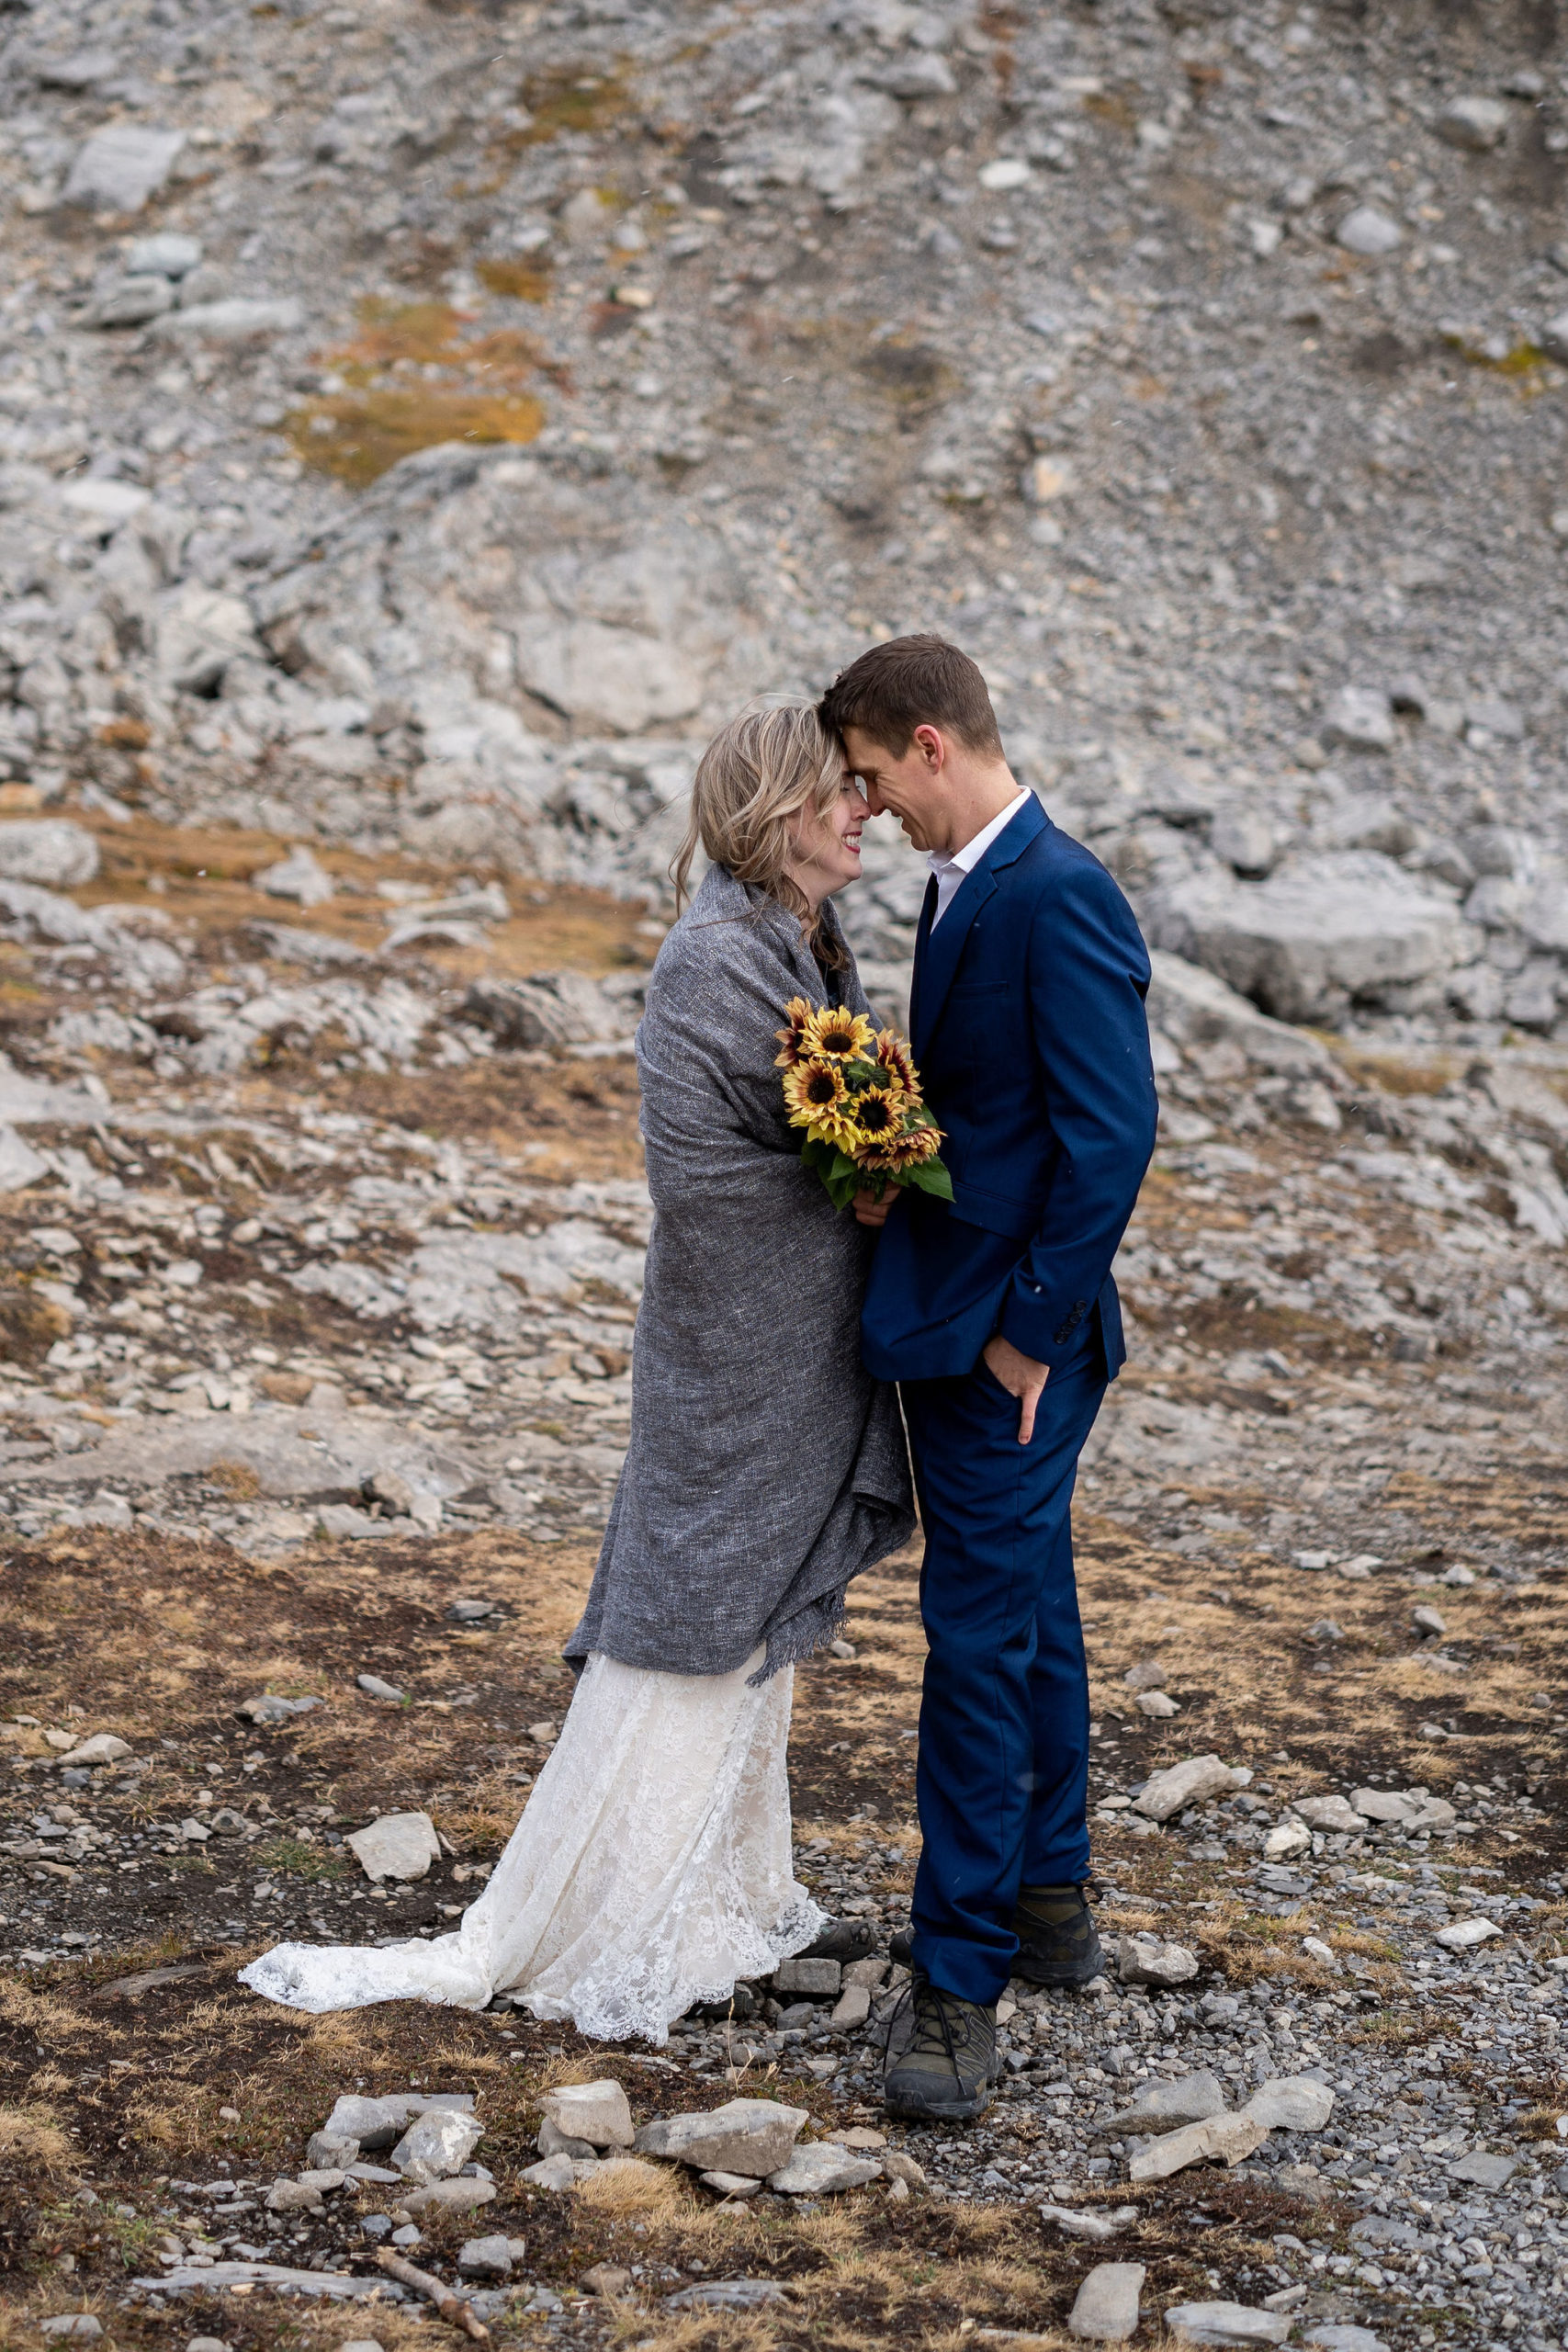 Bride wrapped in grey blanket holding sunflowers touches her forehead to the groom as they smile